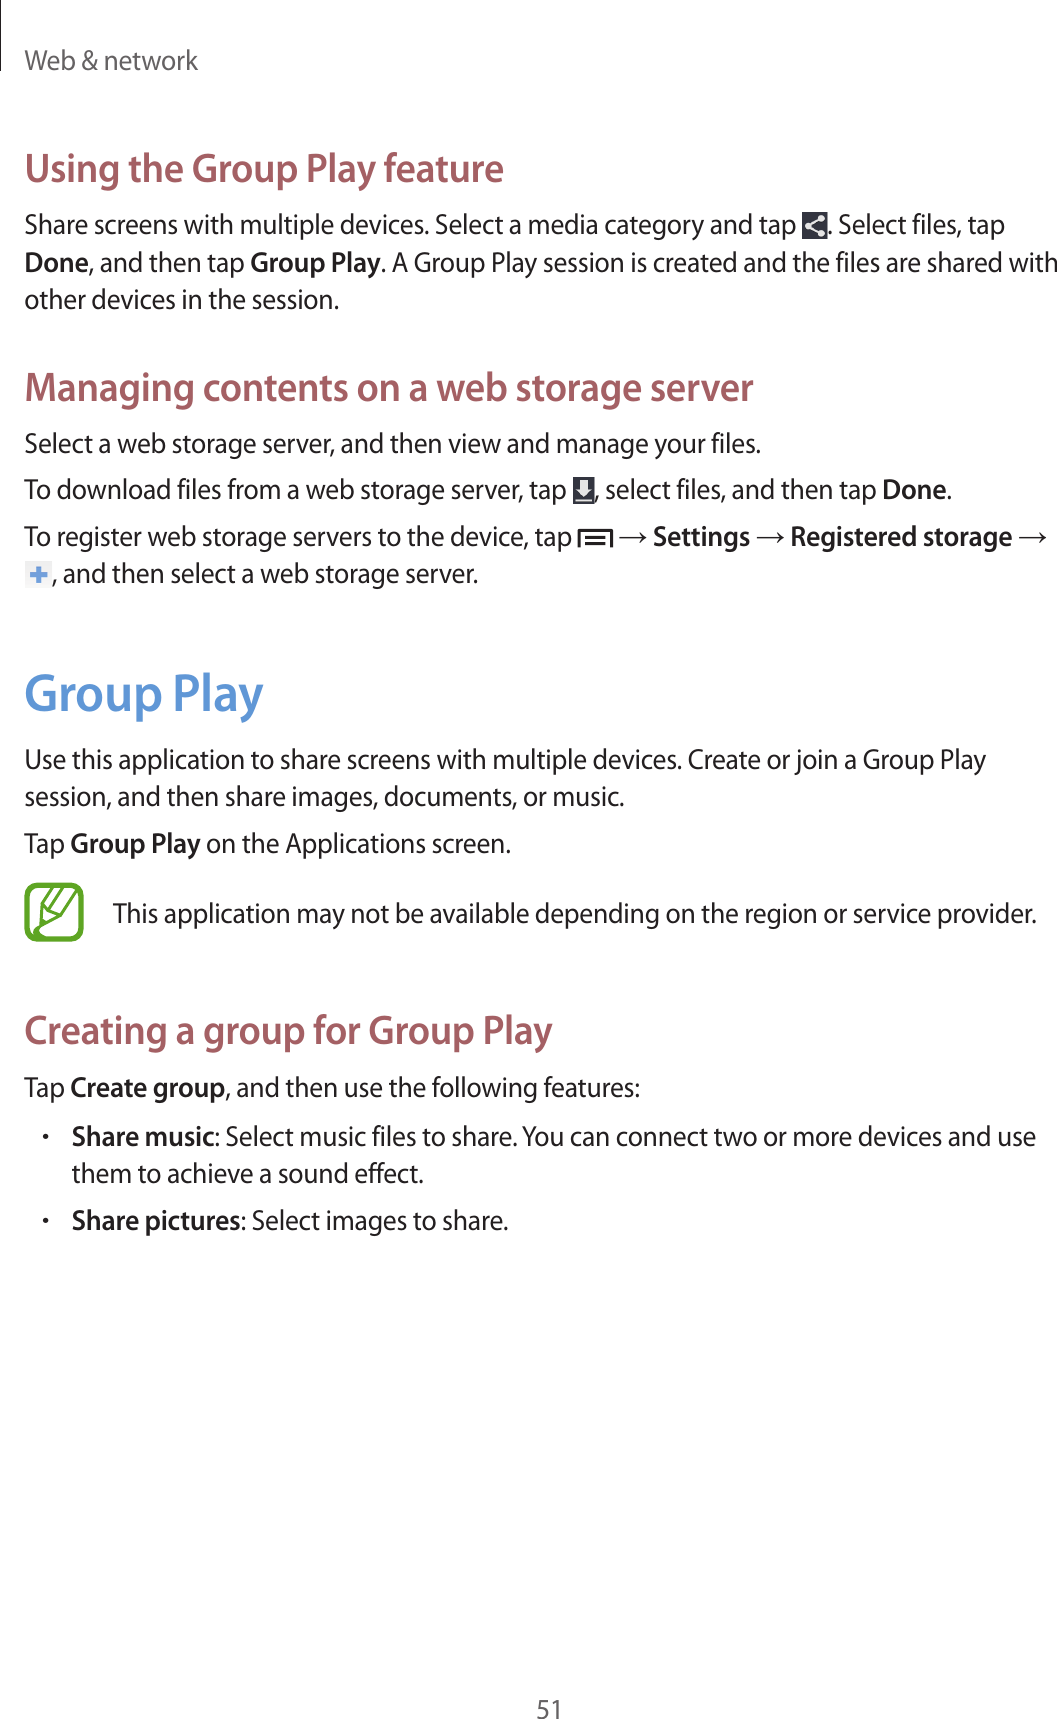 Web &amp; network51Using the Group Play featureShare screens with multiple devices. Select a media category and tap  . Select files, tap Done, and then tap Group Play. A Group Play session is created and the files are shared with other devices in the session.Managing contents on a web storage serverSelect a web storage server, and then view and manage your files.To download files from a web storage server, tap  , select files, and then tap Done.To register web storage servers to the device, tap   → Settings → Registered storage → , and then select a web storage server.Group PlayUse this application to share screens with multiple devices. Create or join a Group Play session, and then share images, documents, or music.Tap Group Play on the Applications screen.This application may not be available depending on the region or service provider.Creating a group for Group PlayTap Create group, and then use the following features:•Share music: Select music files to share. You can connect two or more devices and use them to achieve a sound effect.•Share pictures: Select images to share.